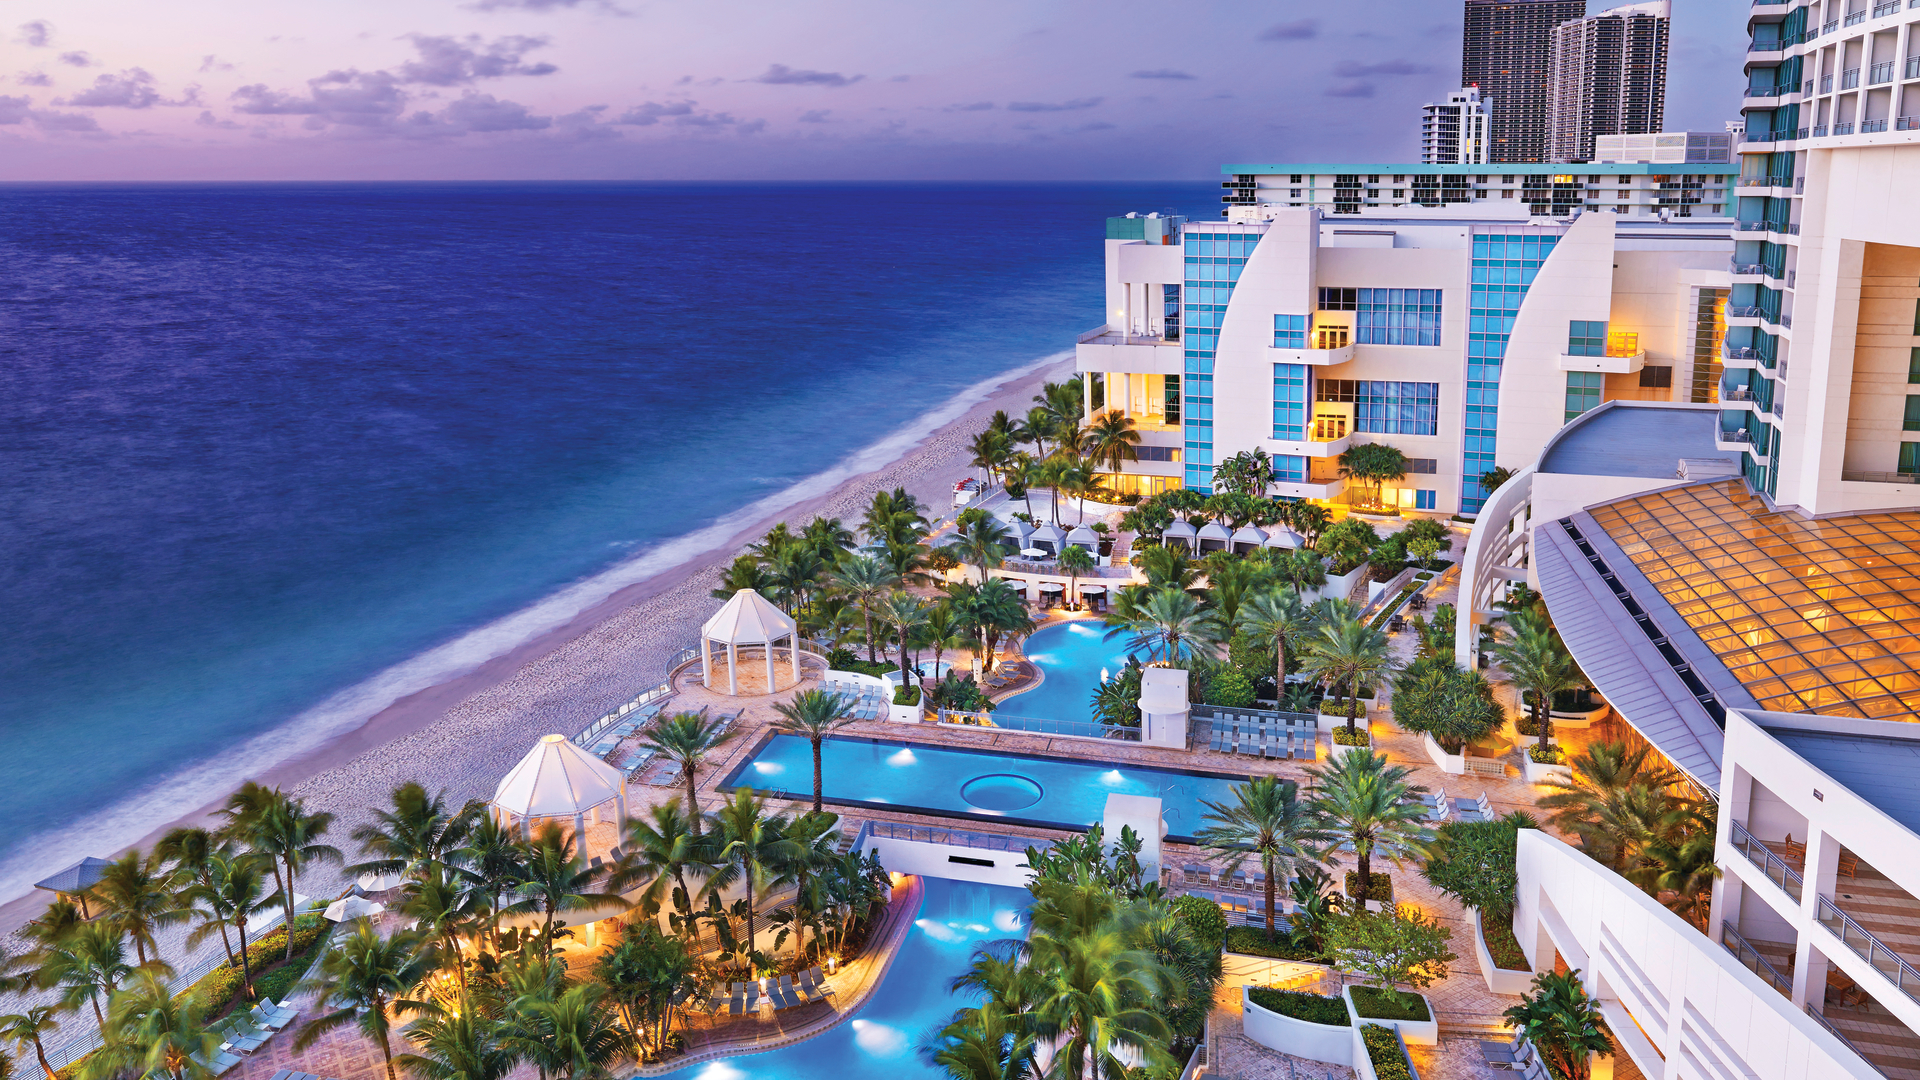 Photo of The Diplomat Beach Resort Hollywood, Curio Collection by Hilton, Hollywood, FL